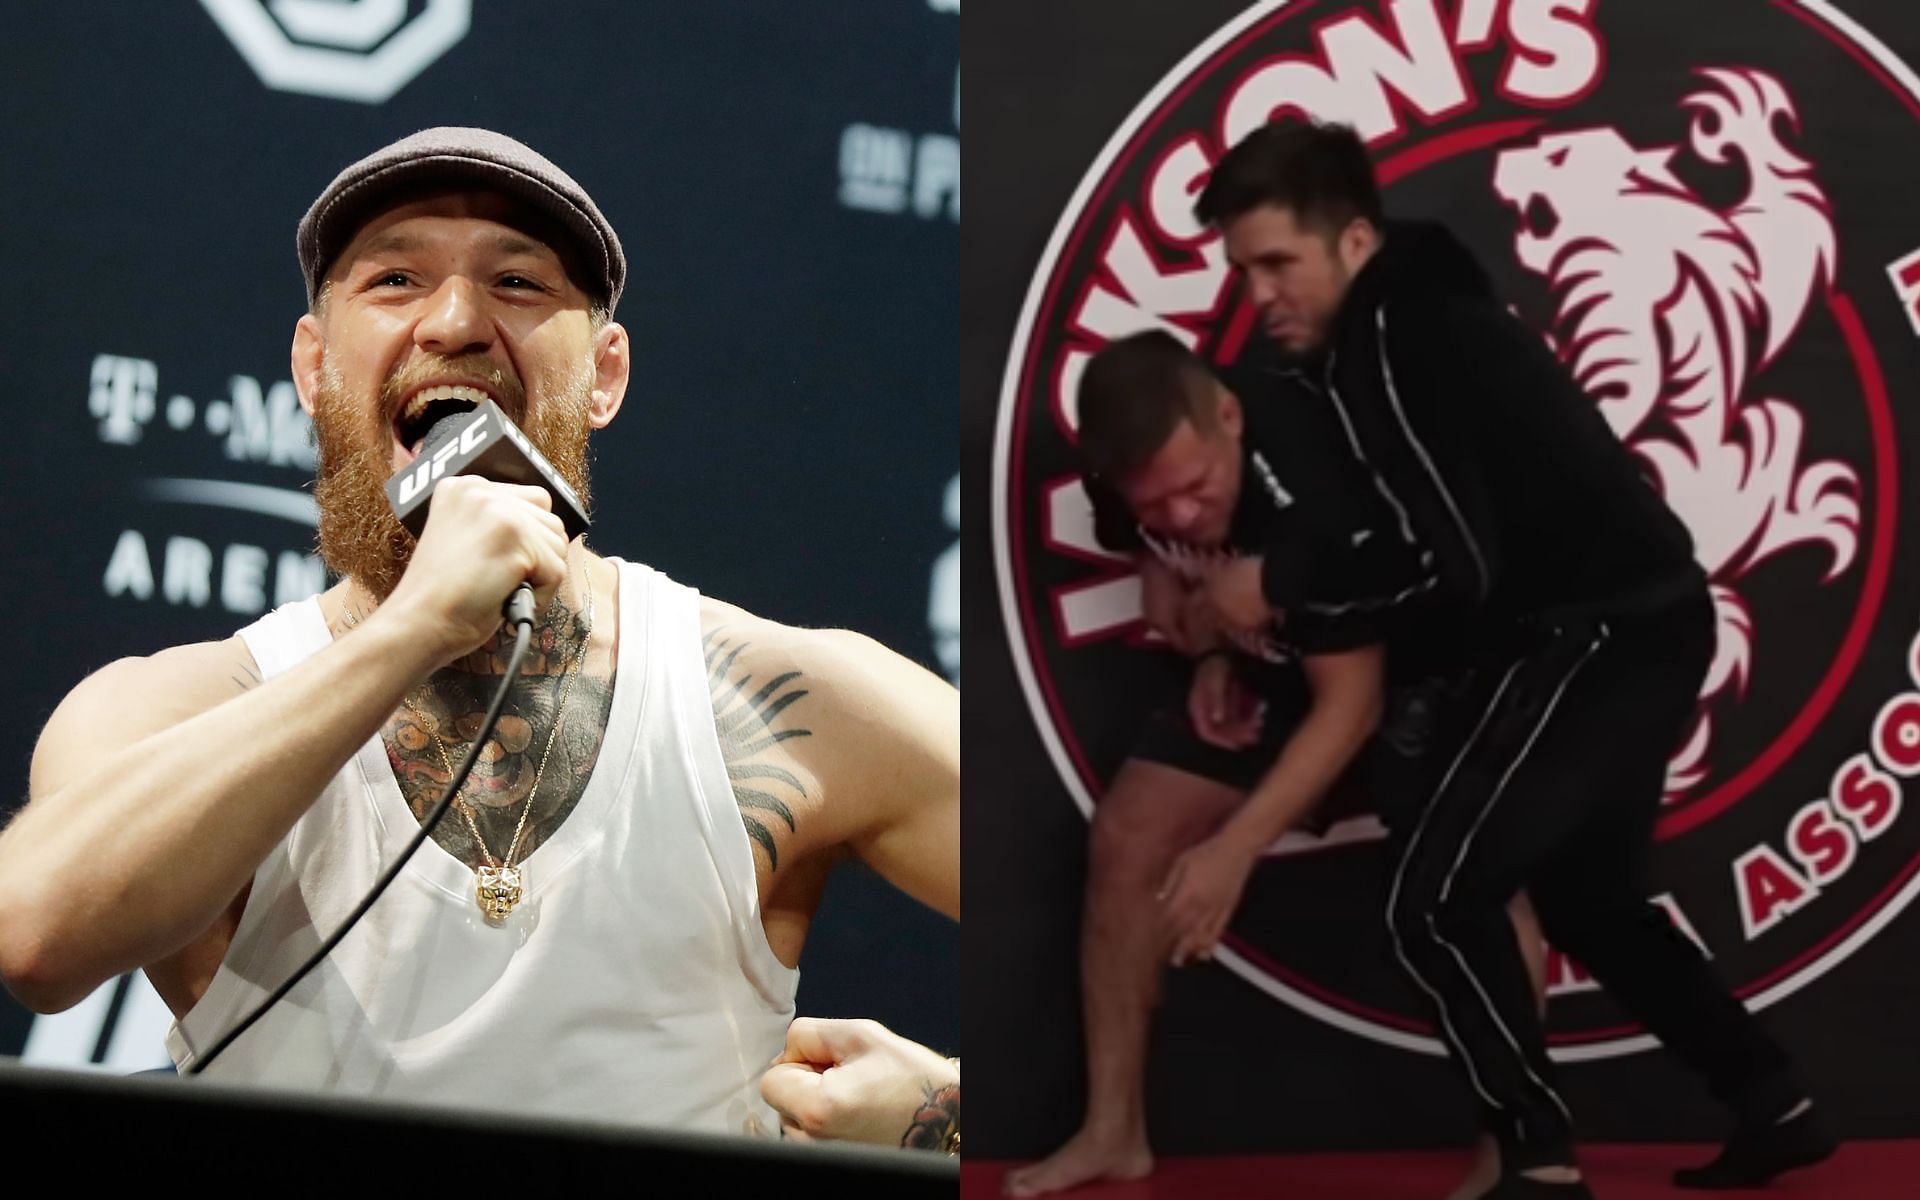 Conor McGregor (left) and Henry Cejudo (right) (Image credits Getty Images and Henry Cejudo on YouTube)